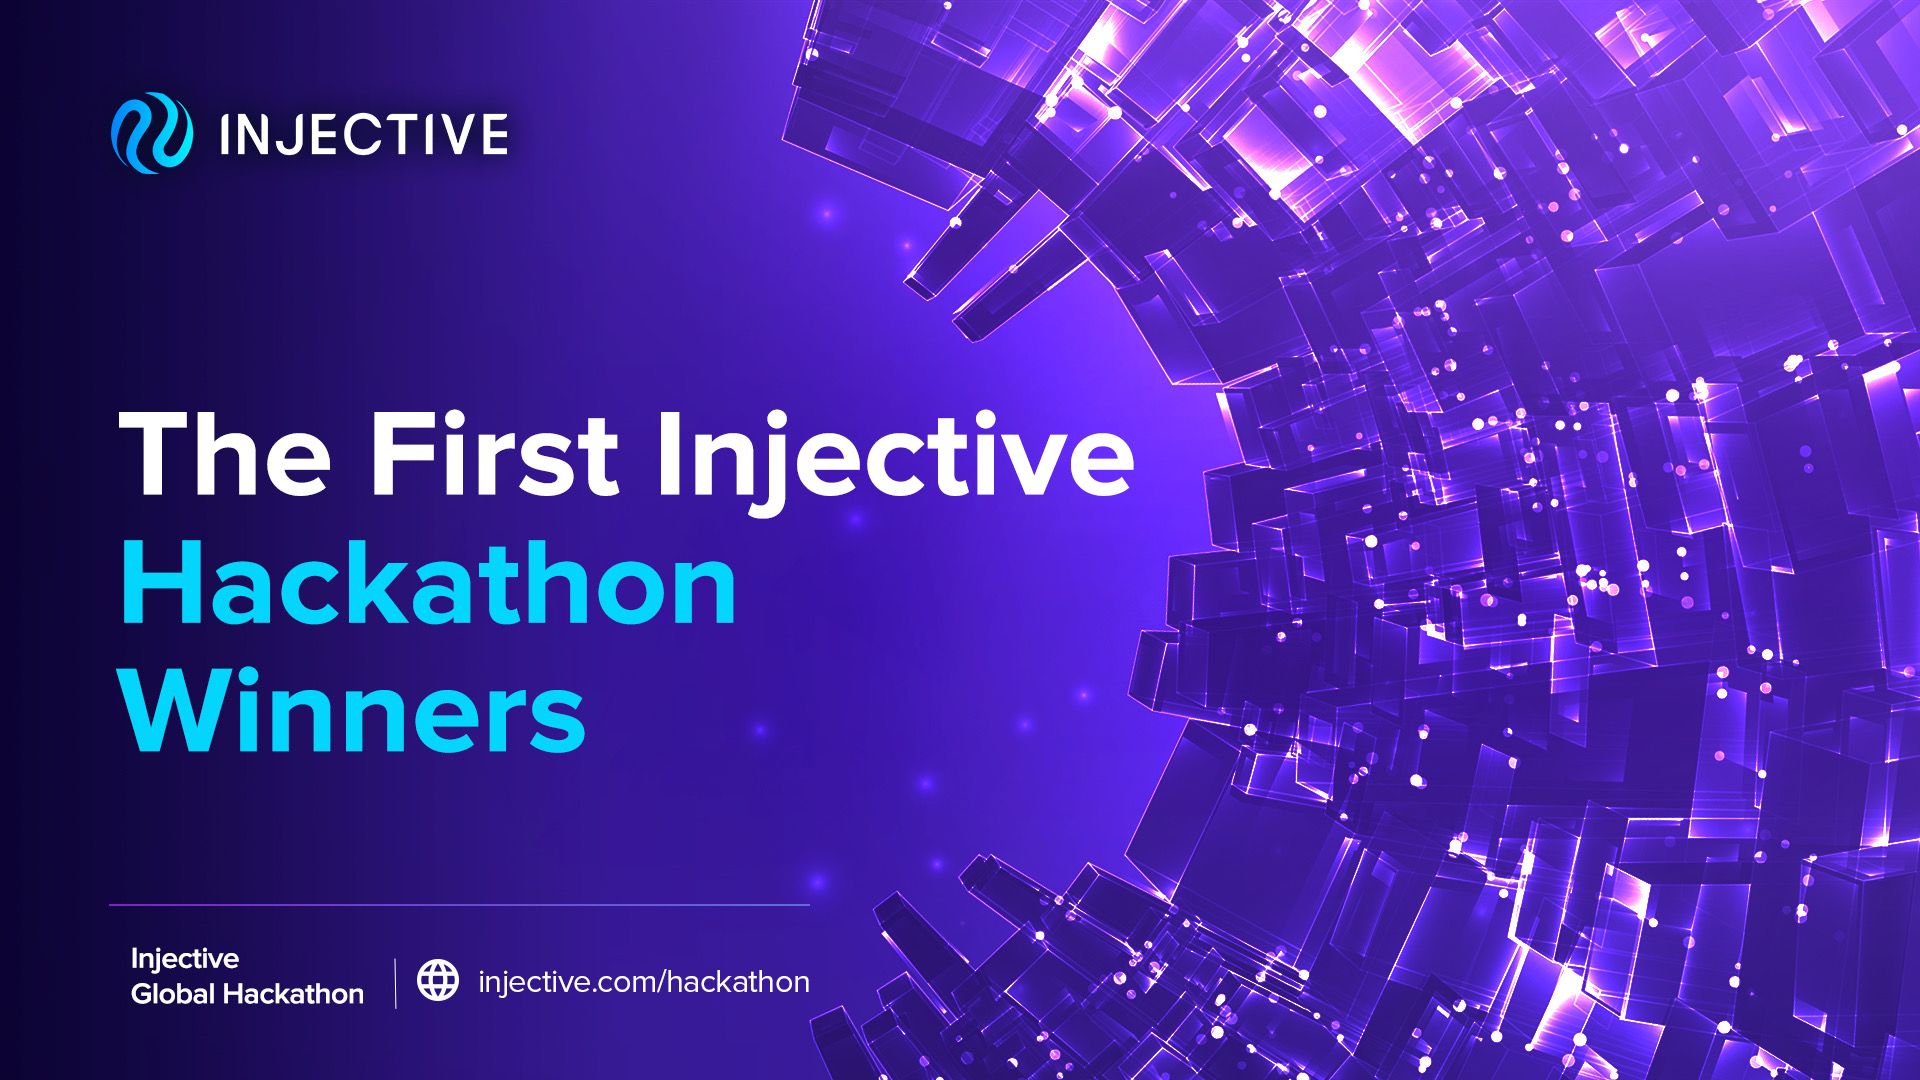 The First Injective Hackathon Winners